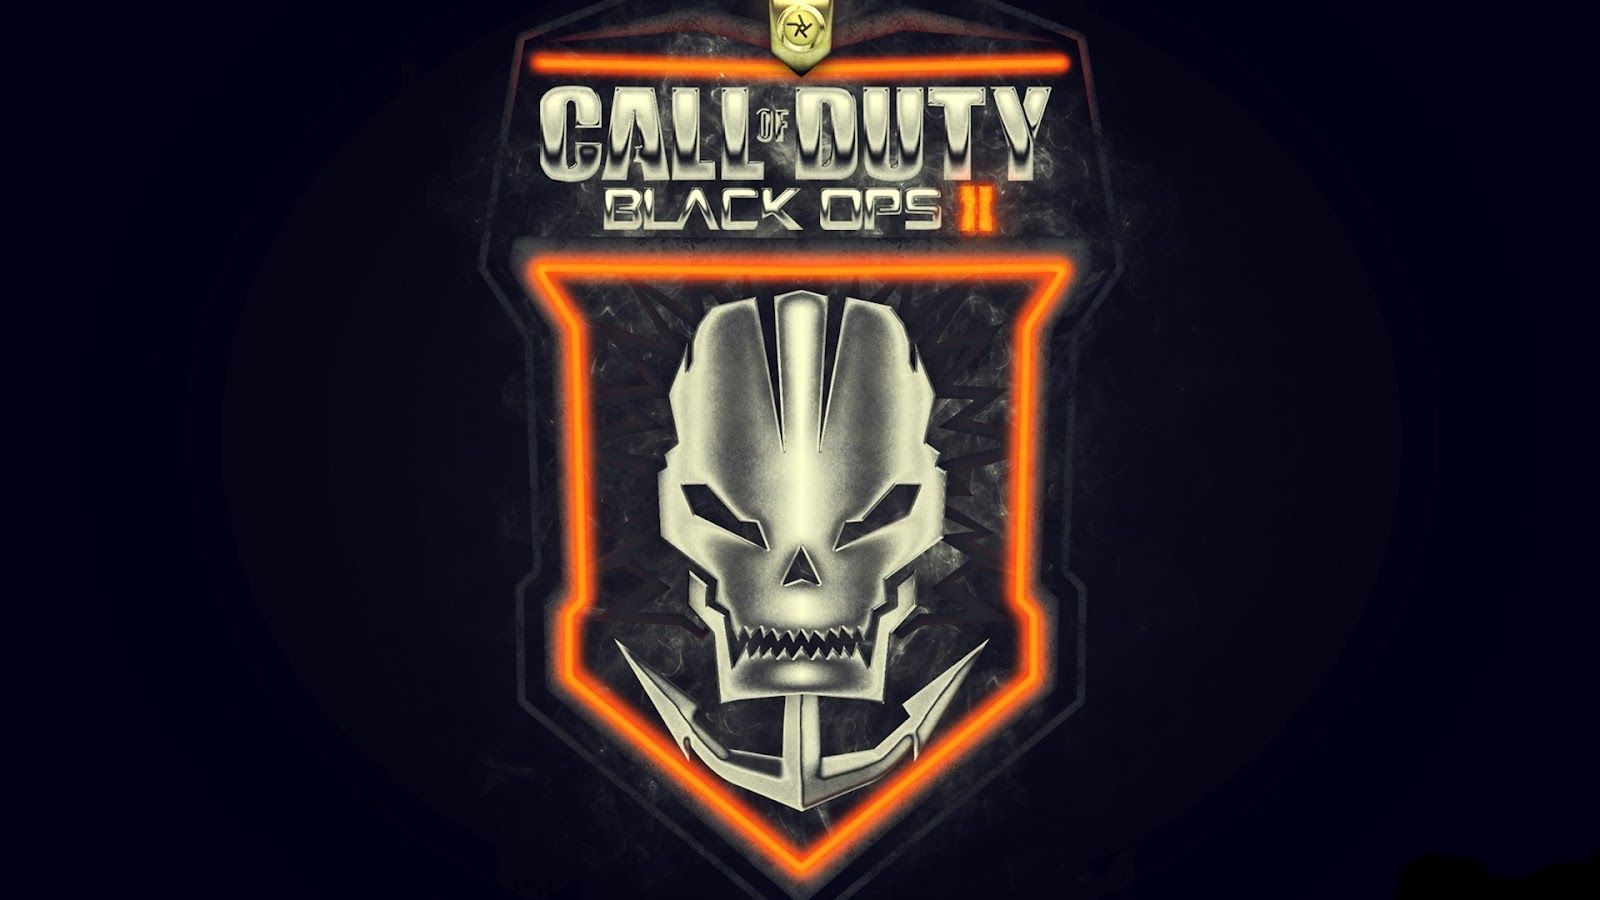 HD WALLPAPERS: Call of Duty Black ops 2 HD Wallpapers